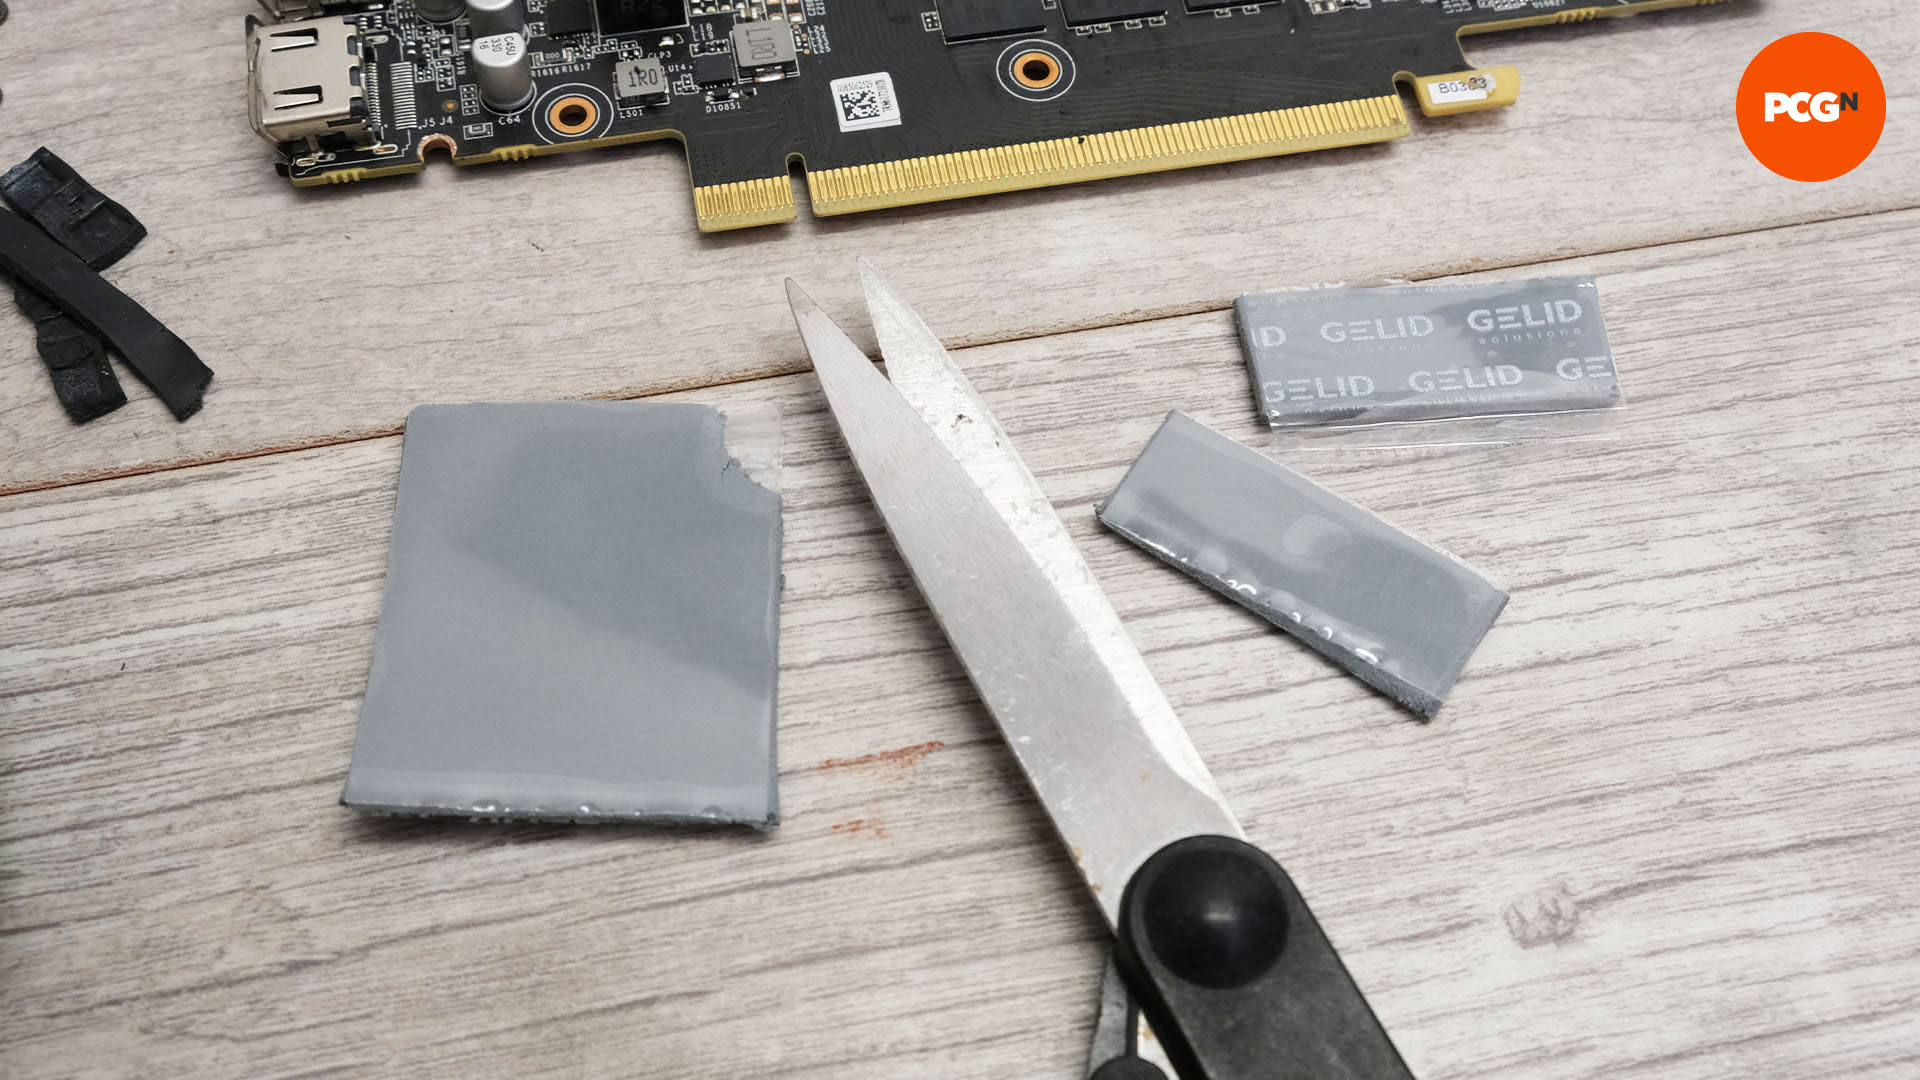 How to lower GPU temp: Cut new thermal pads to size